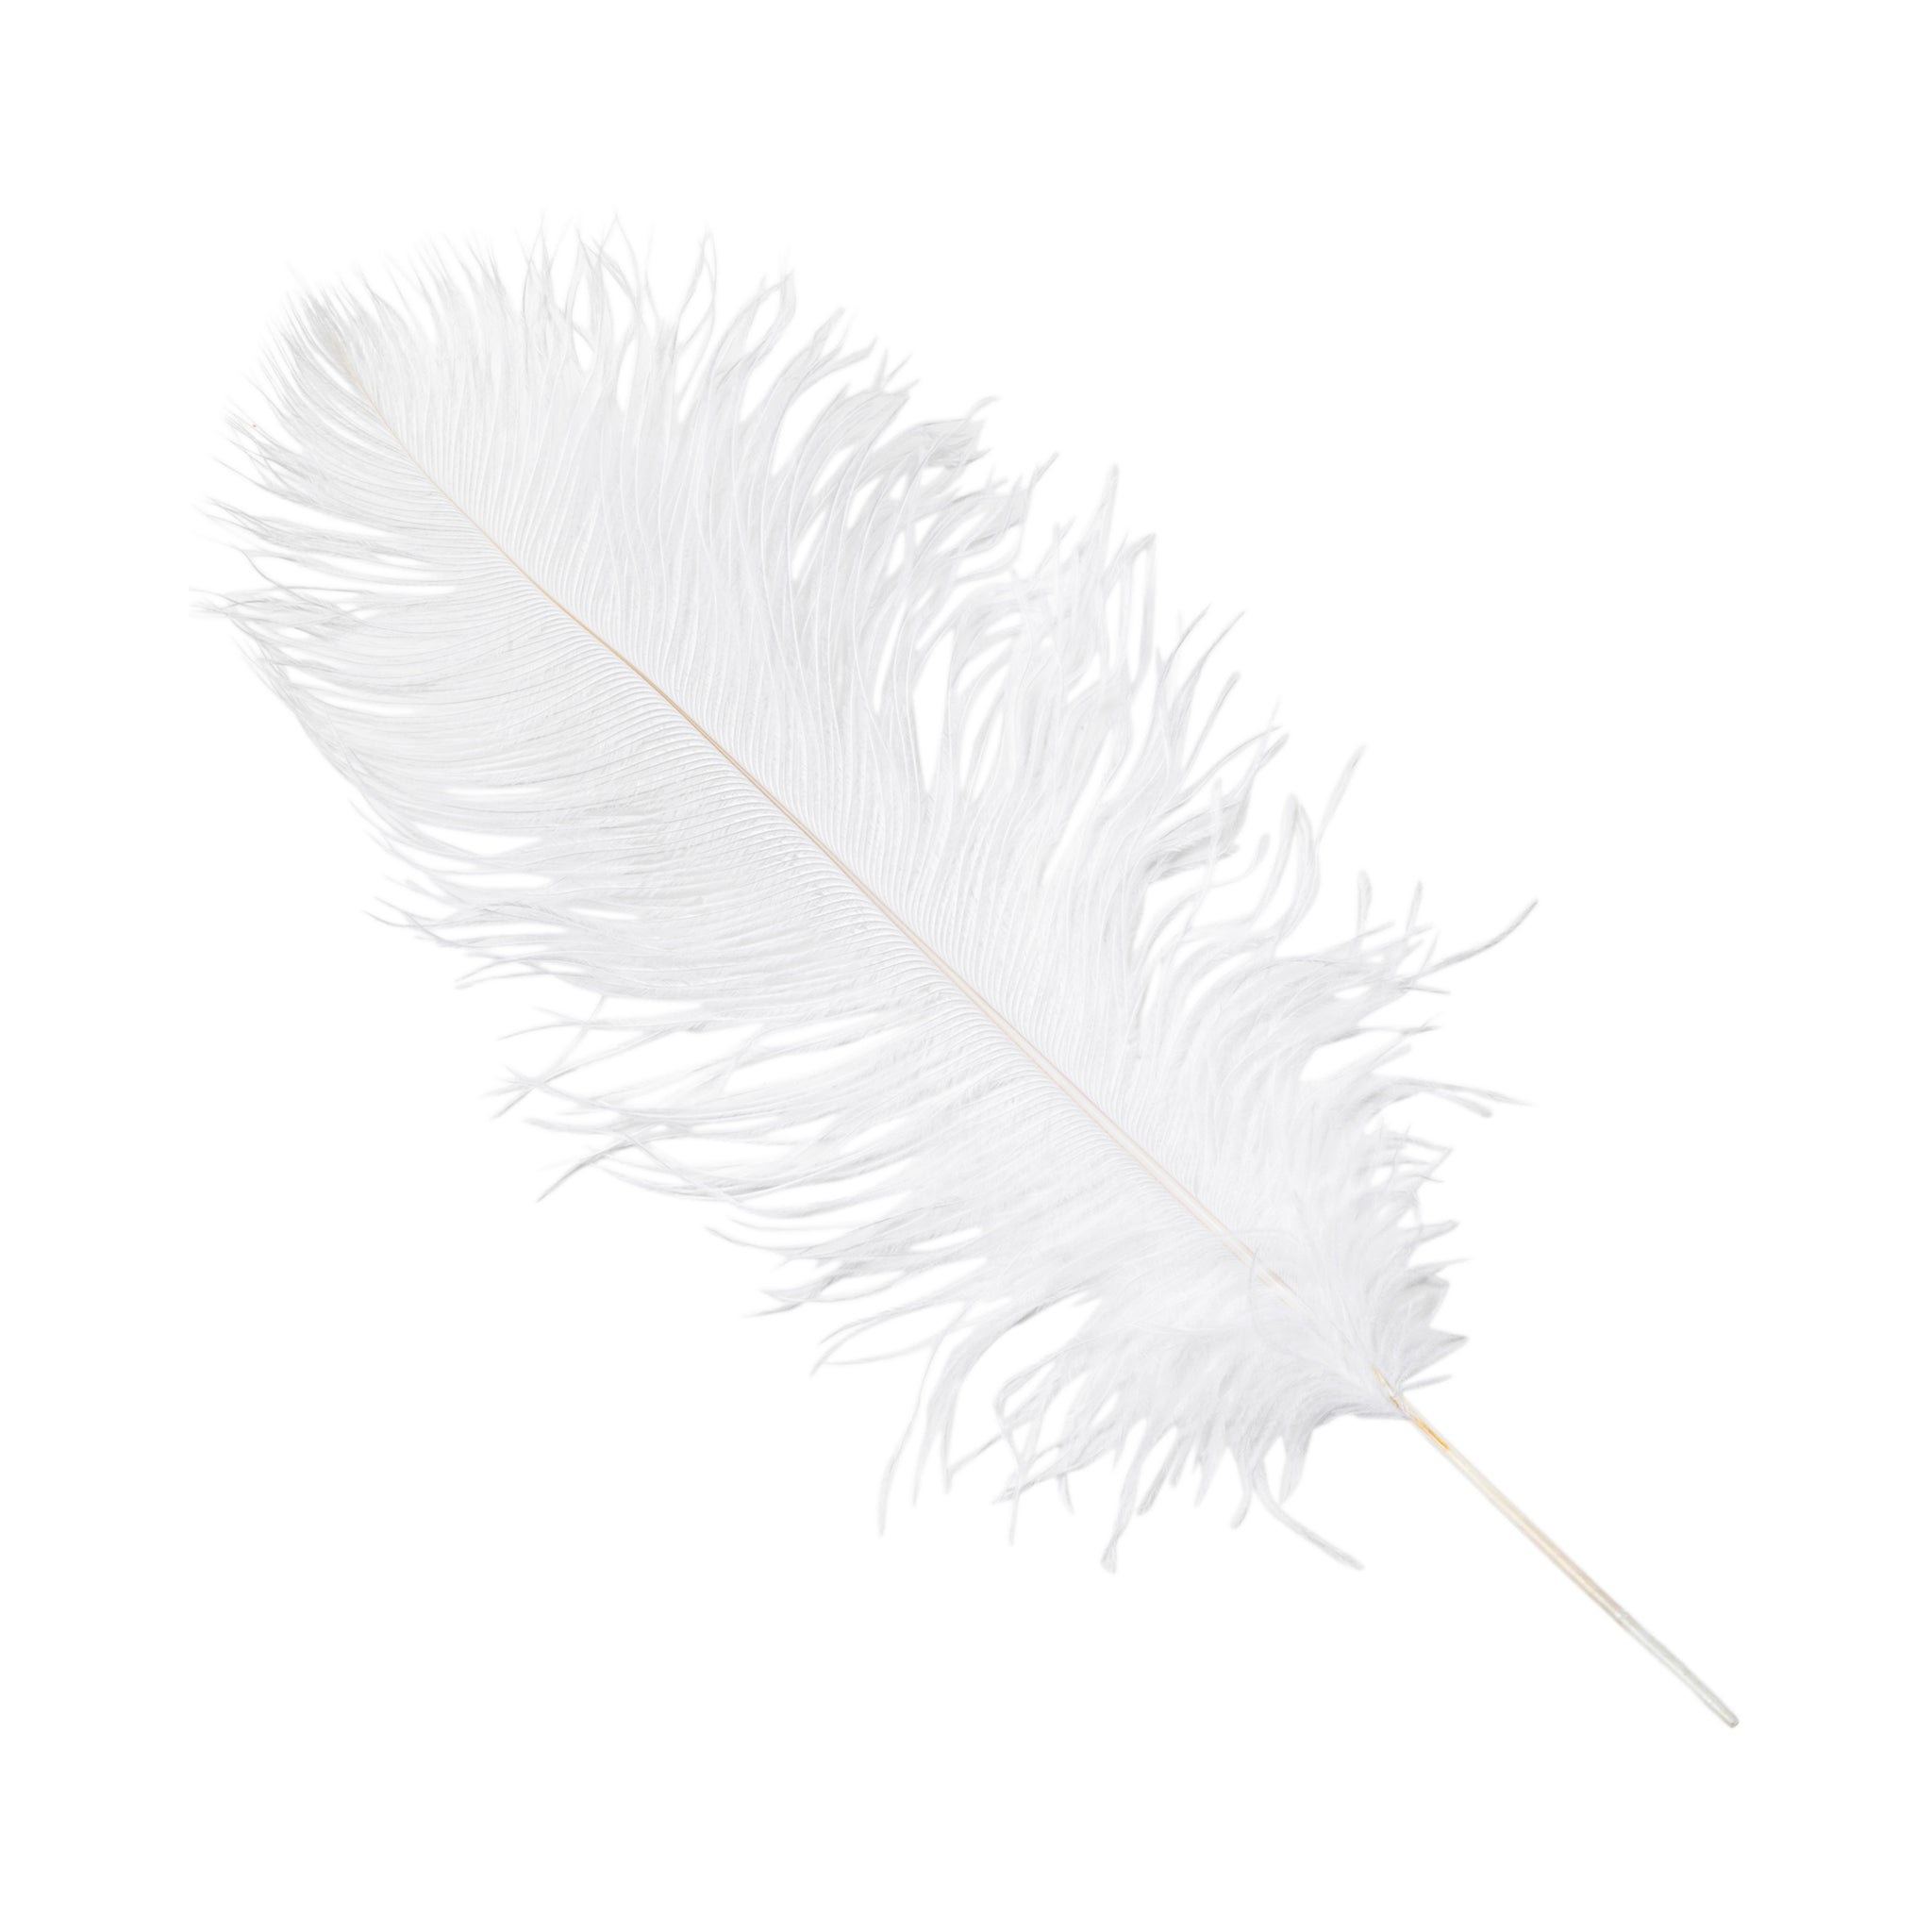 Larryhot White Large Ostrich Feathers - 16-18 inch 10pcs Feathers